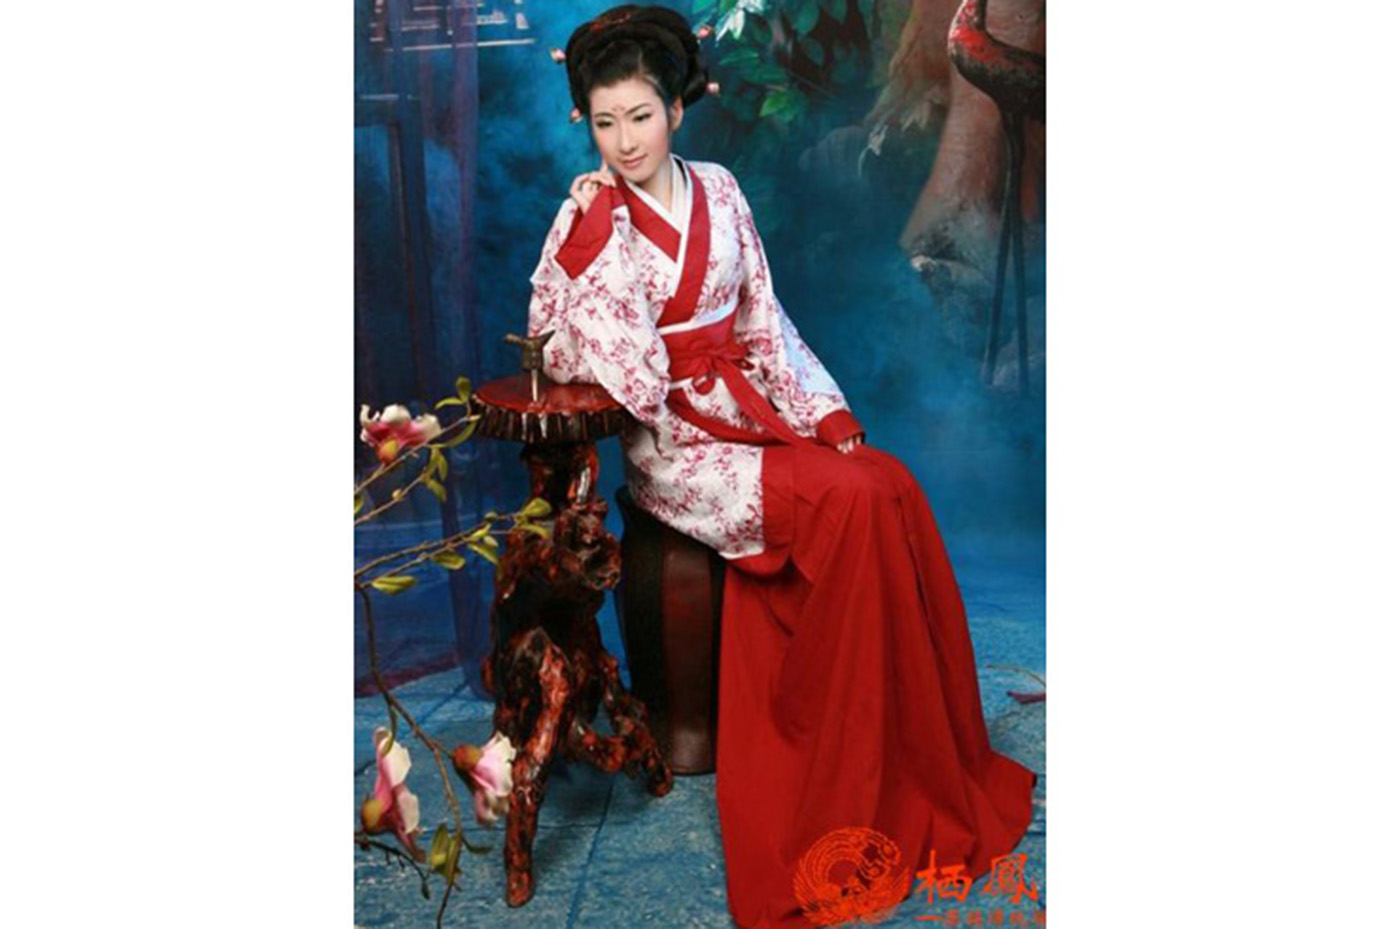 What are some types of traditional Chinese clothing?